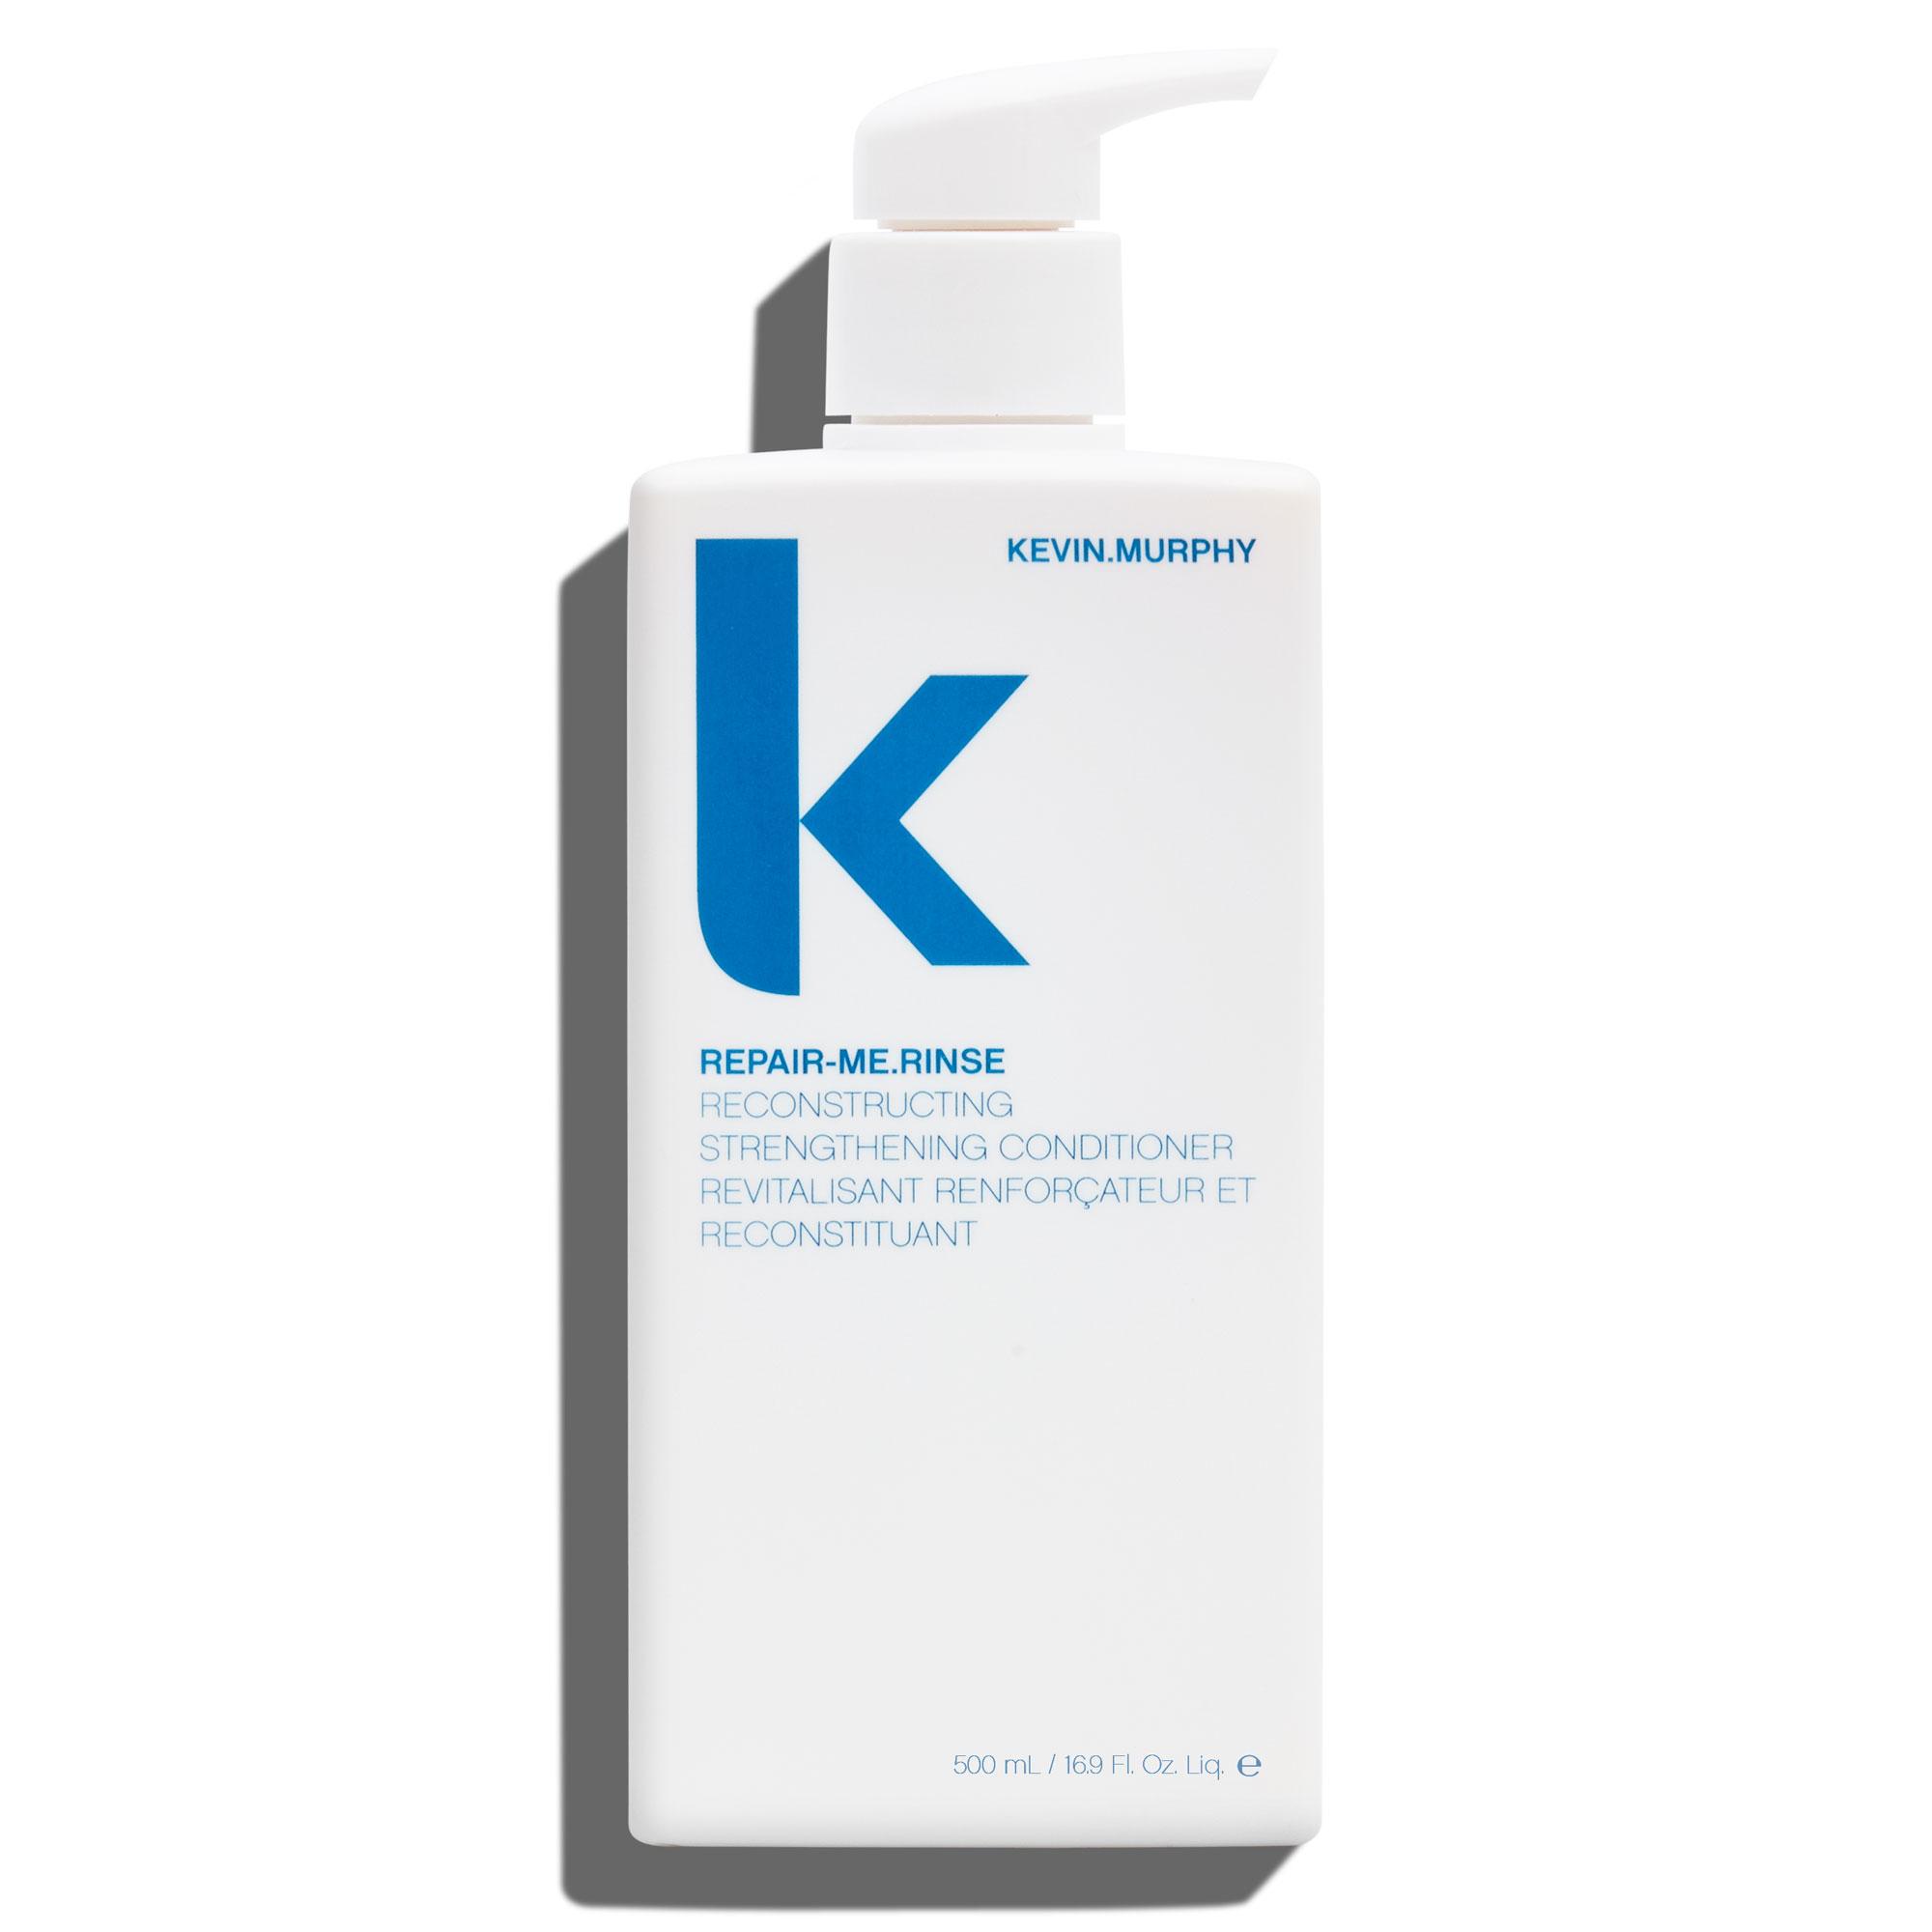 KEVIN.MURPHY REPAIR.ME RINSE (Limited Edition) .5liter